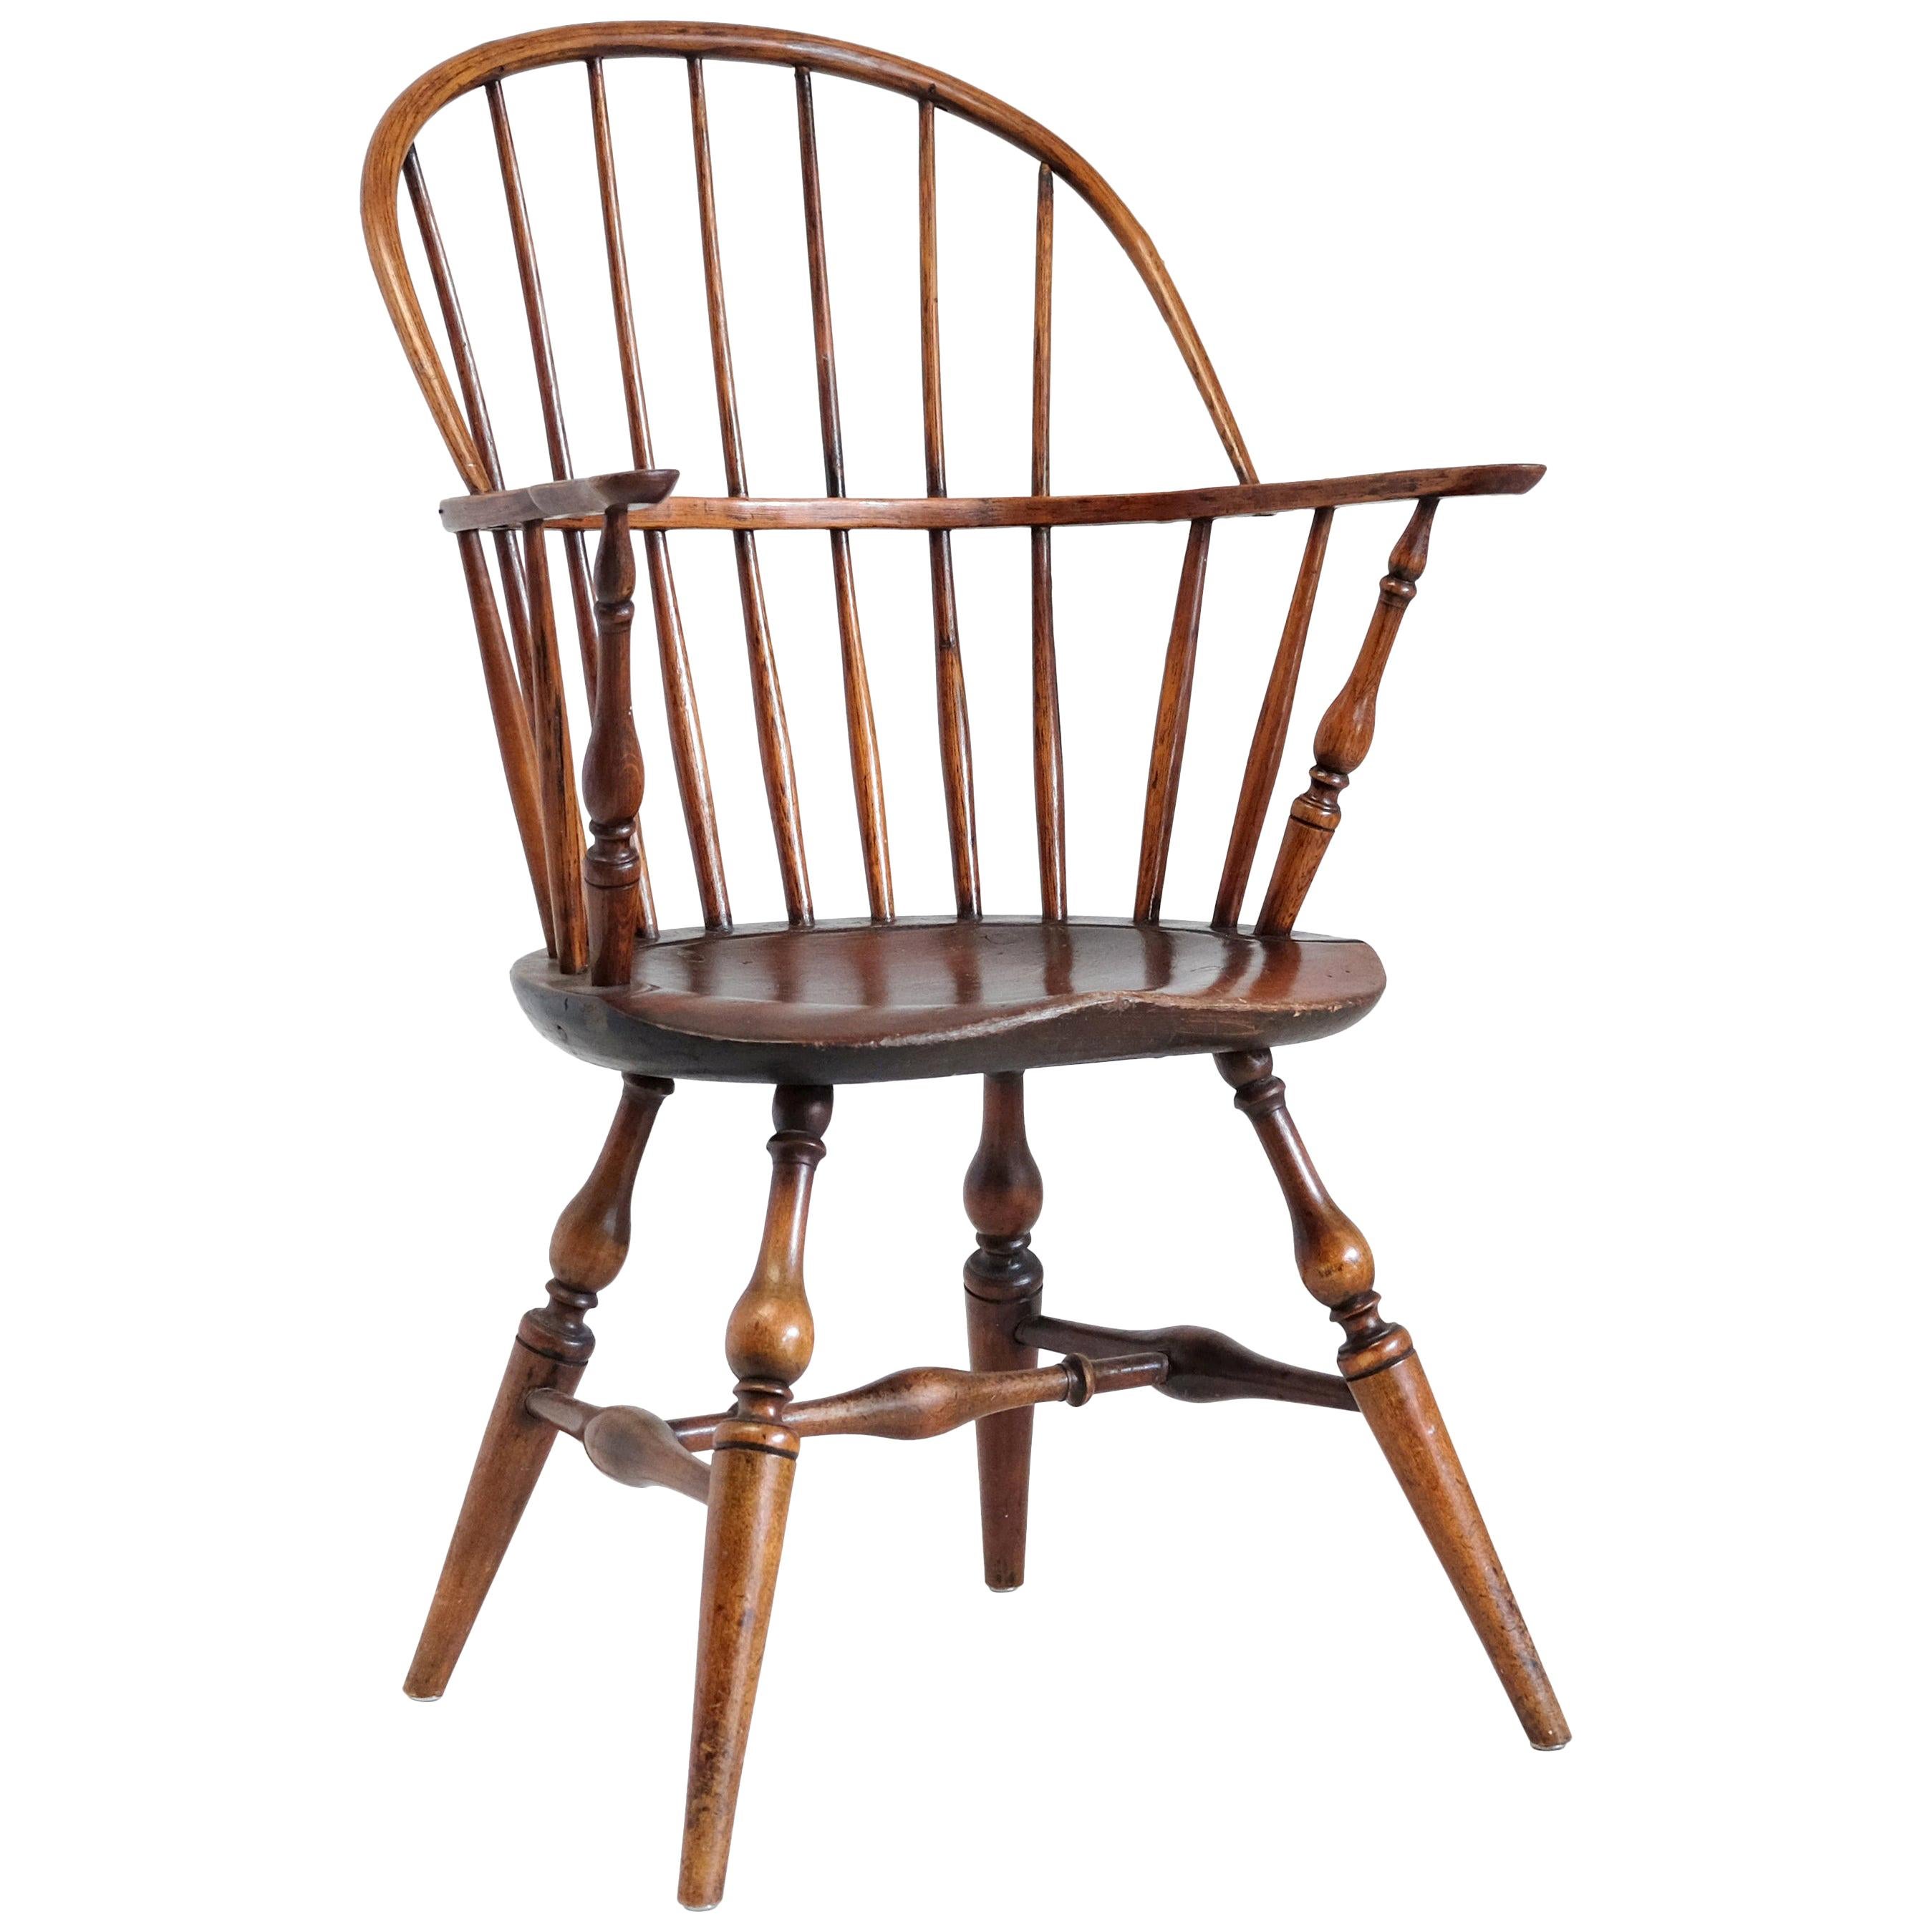 American 'Sack Back' Windsor Chair with Provenance, 18th Century, Connecticut For Sale